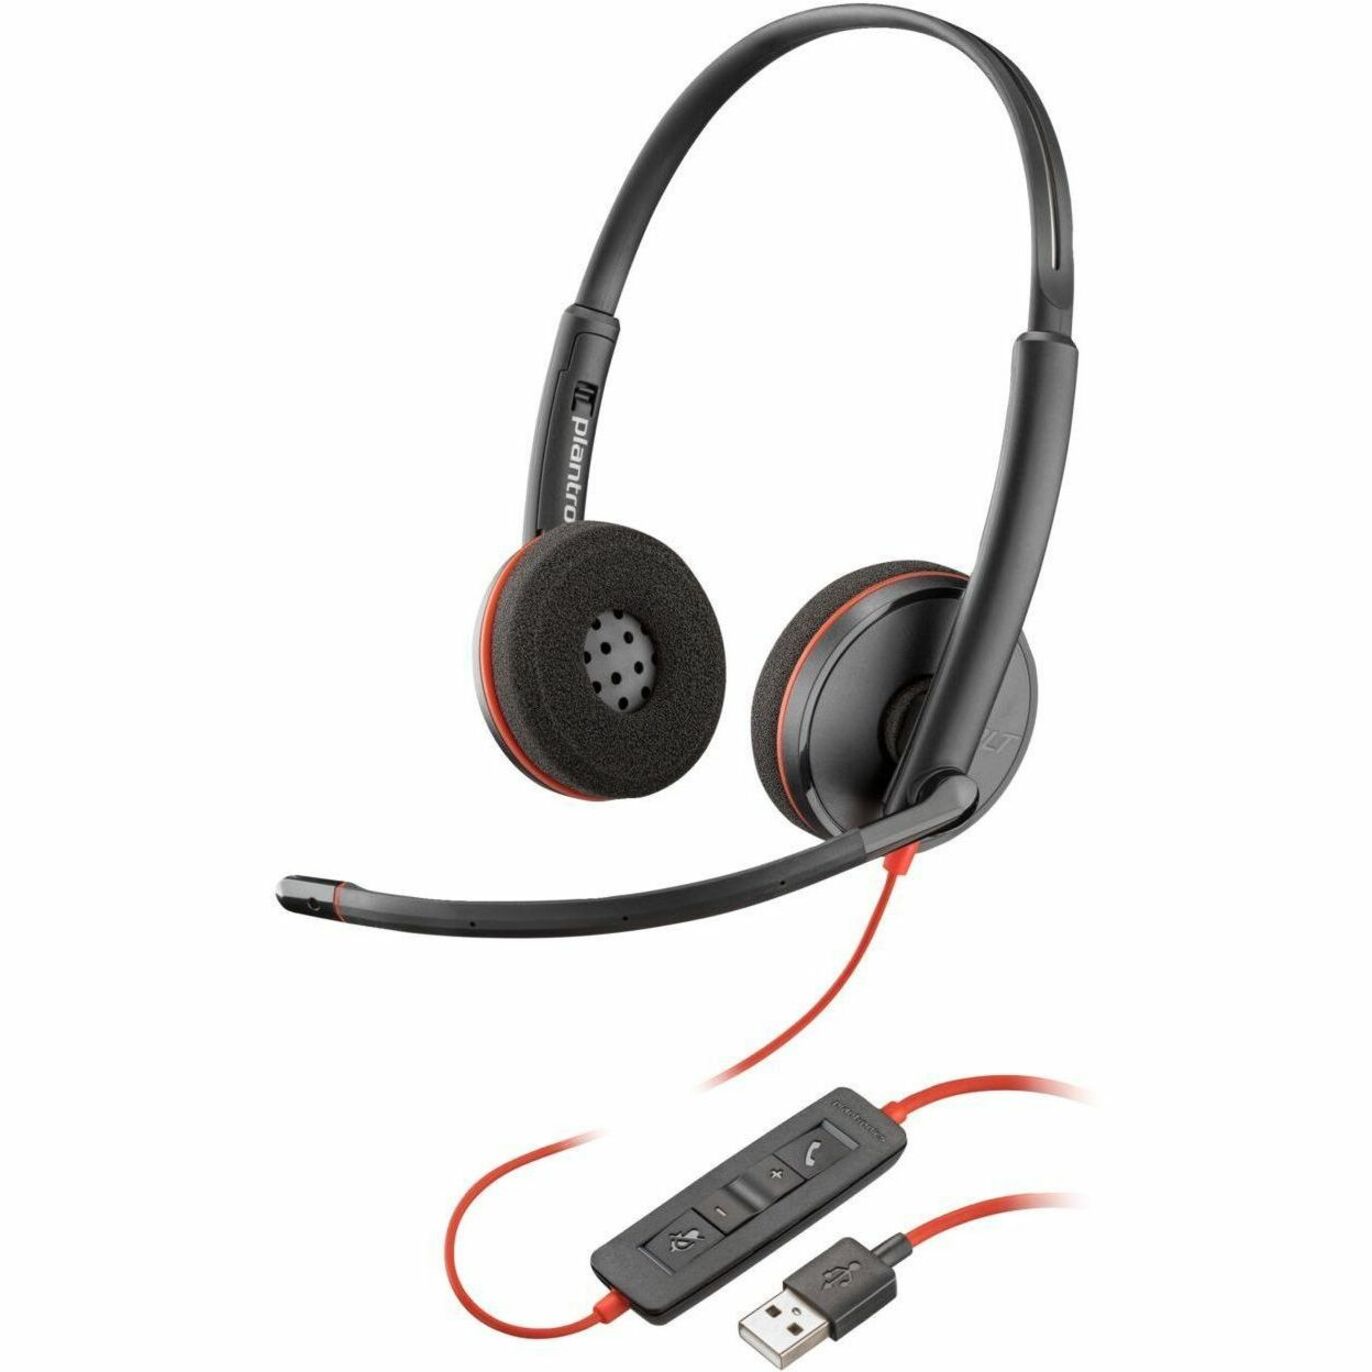 Poly Blackwire 3220 Headset, Binaural Over-the-ear Over-the-head, Noise Cancelling, USB Type A Mini-phone (3.5mm) Connectivity